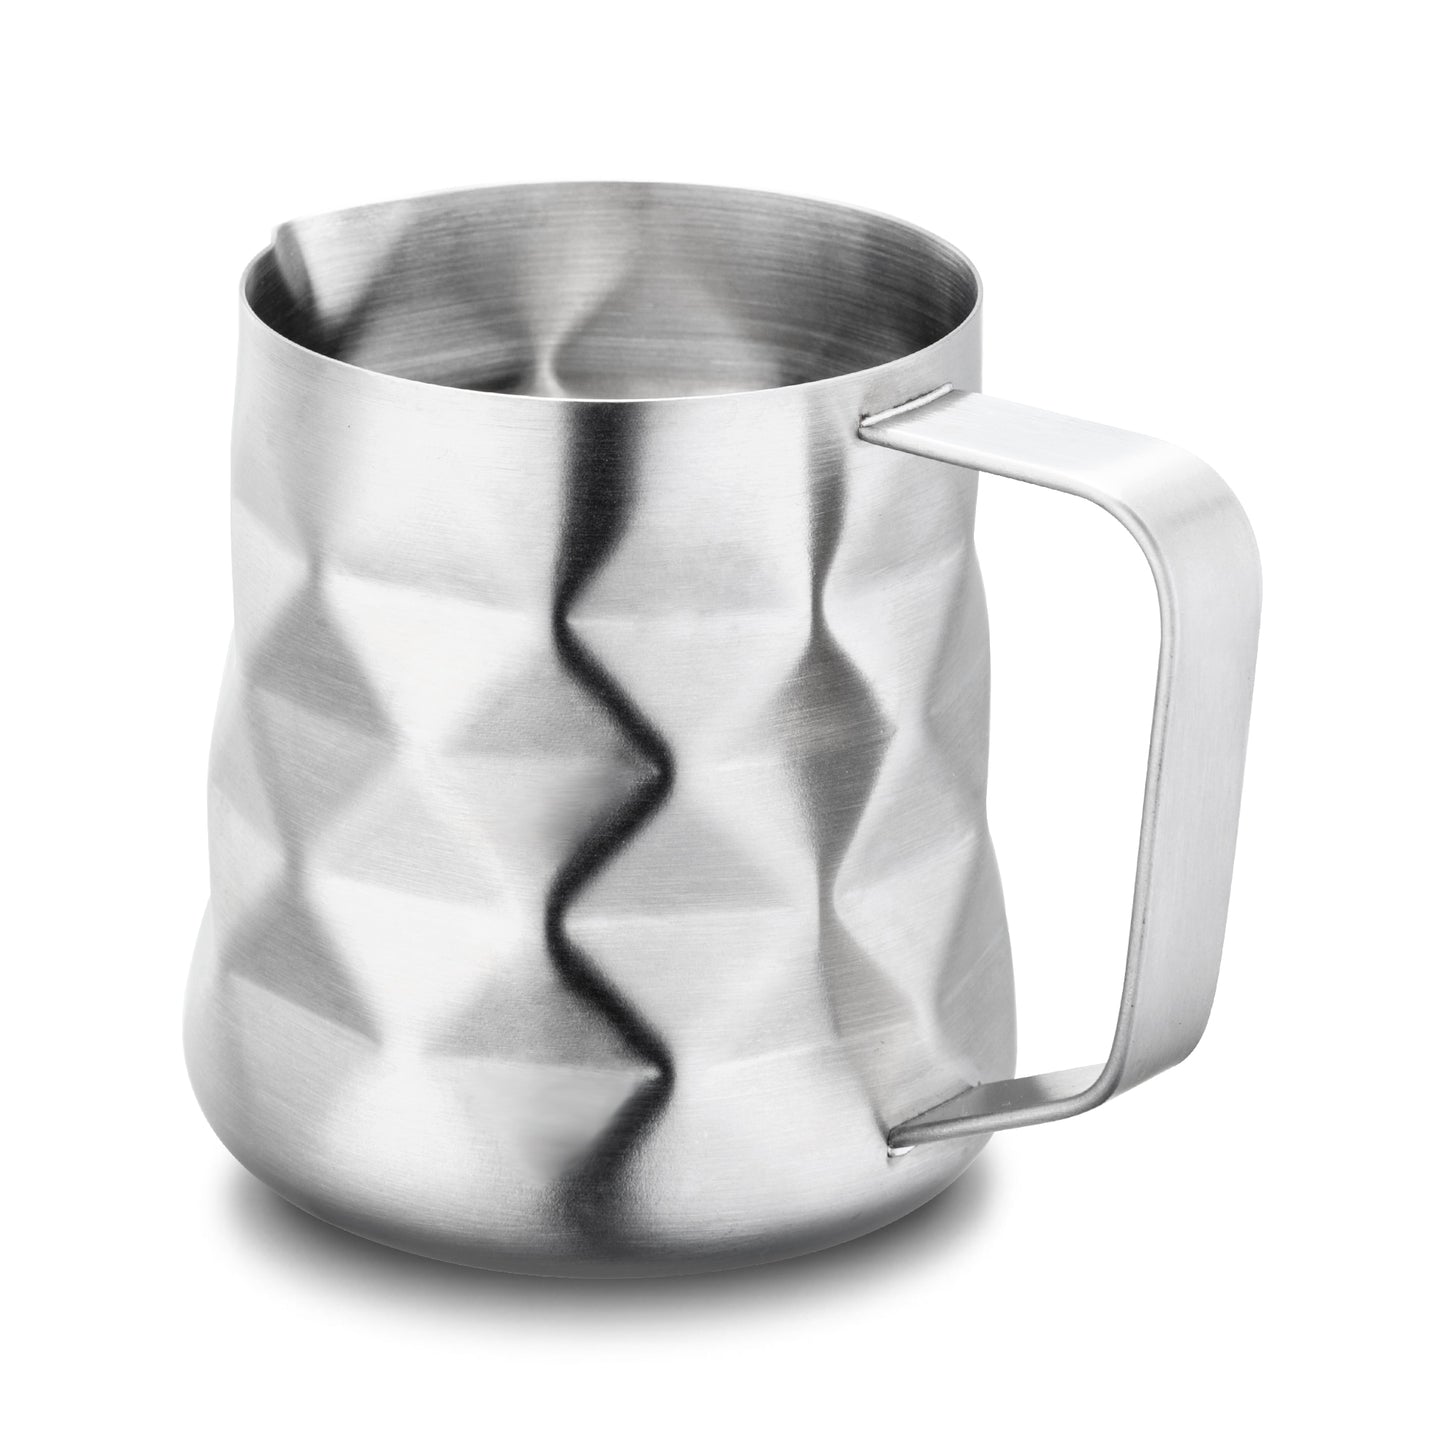 Stylish Coffee Frothing Pitcher In Diamond Pattern Prism Design 12 Ounce